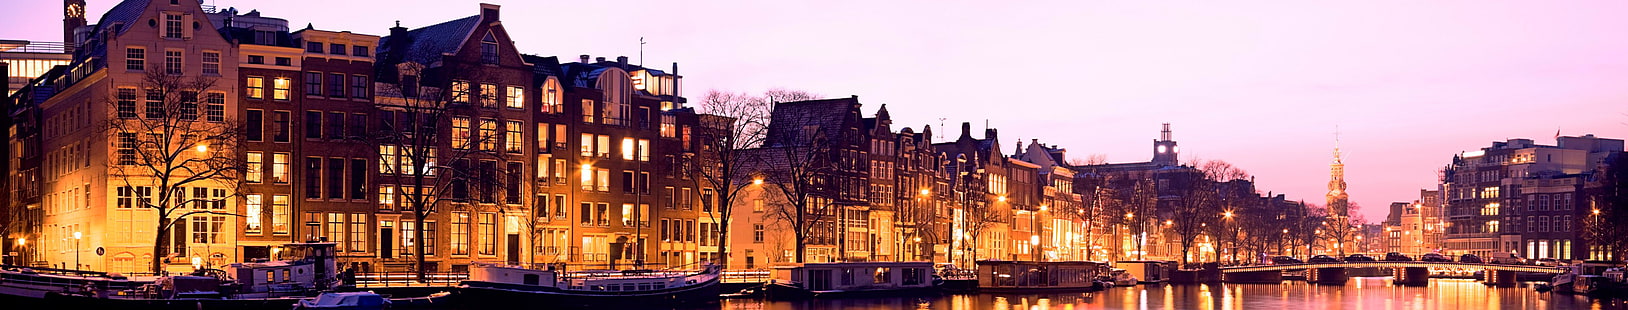 panoramic photo of brown buildings, canal, street, city, lights, evening, house, trees, boat, tower, holland, Netherlands, panorama, Europe, HD wallpaper HD wallpaper